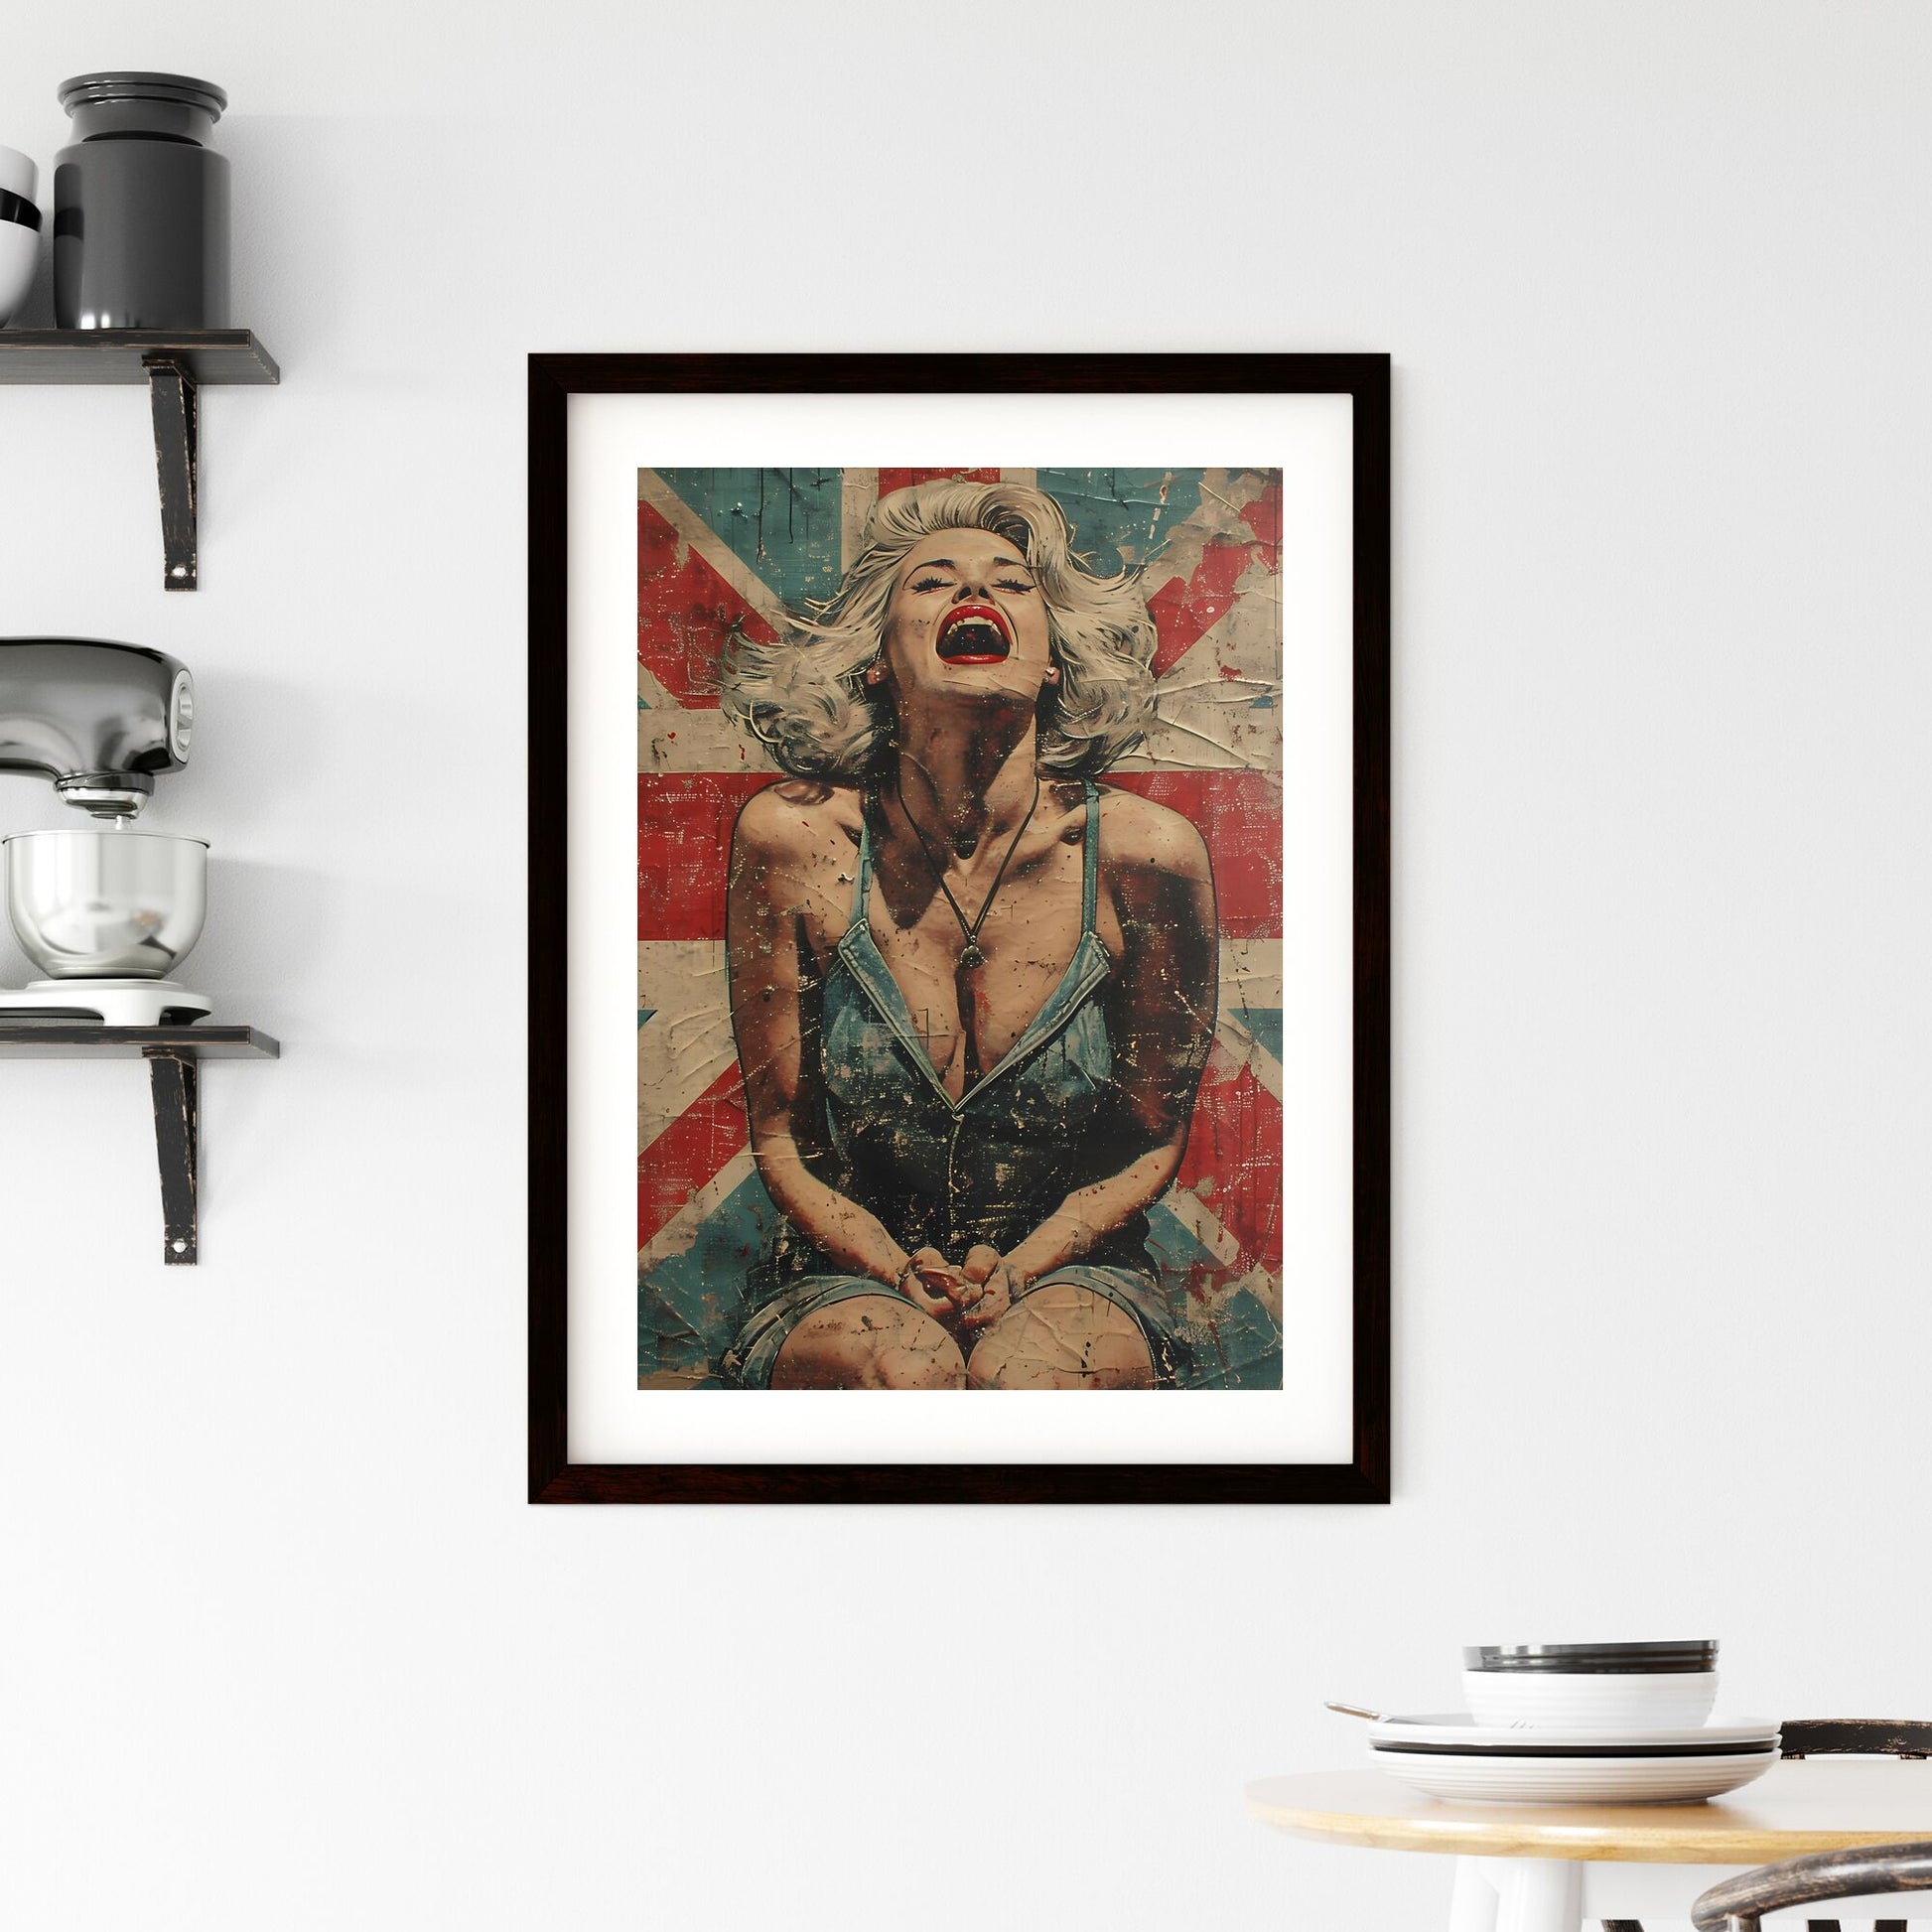 Fresco mixed with realism and pop art - Art print of a woman sitting on a flag Default Title